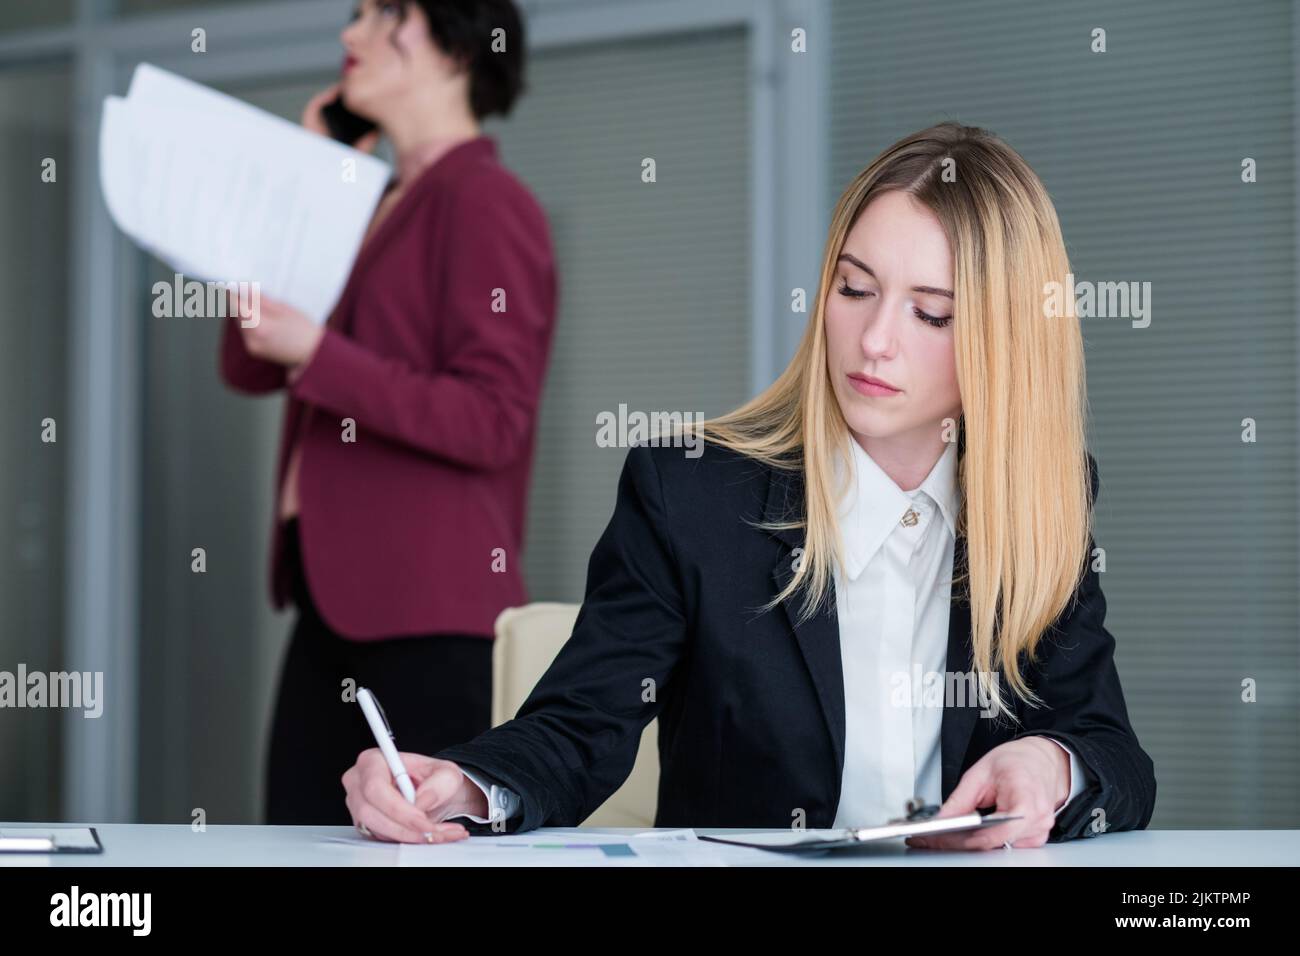 office lifestyle business woman workspace manager Stock Photo